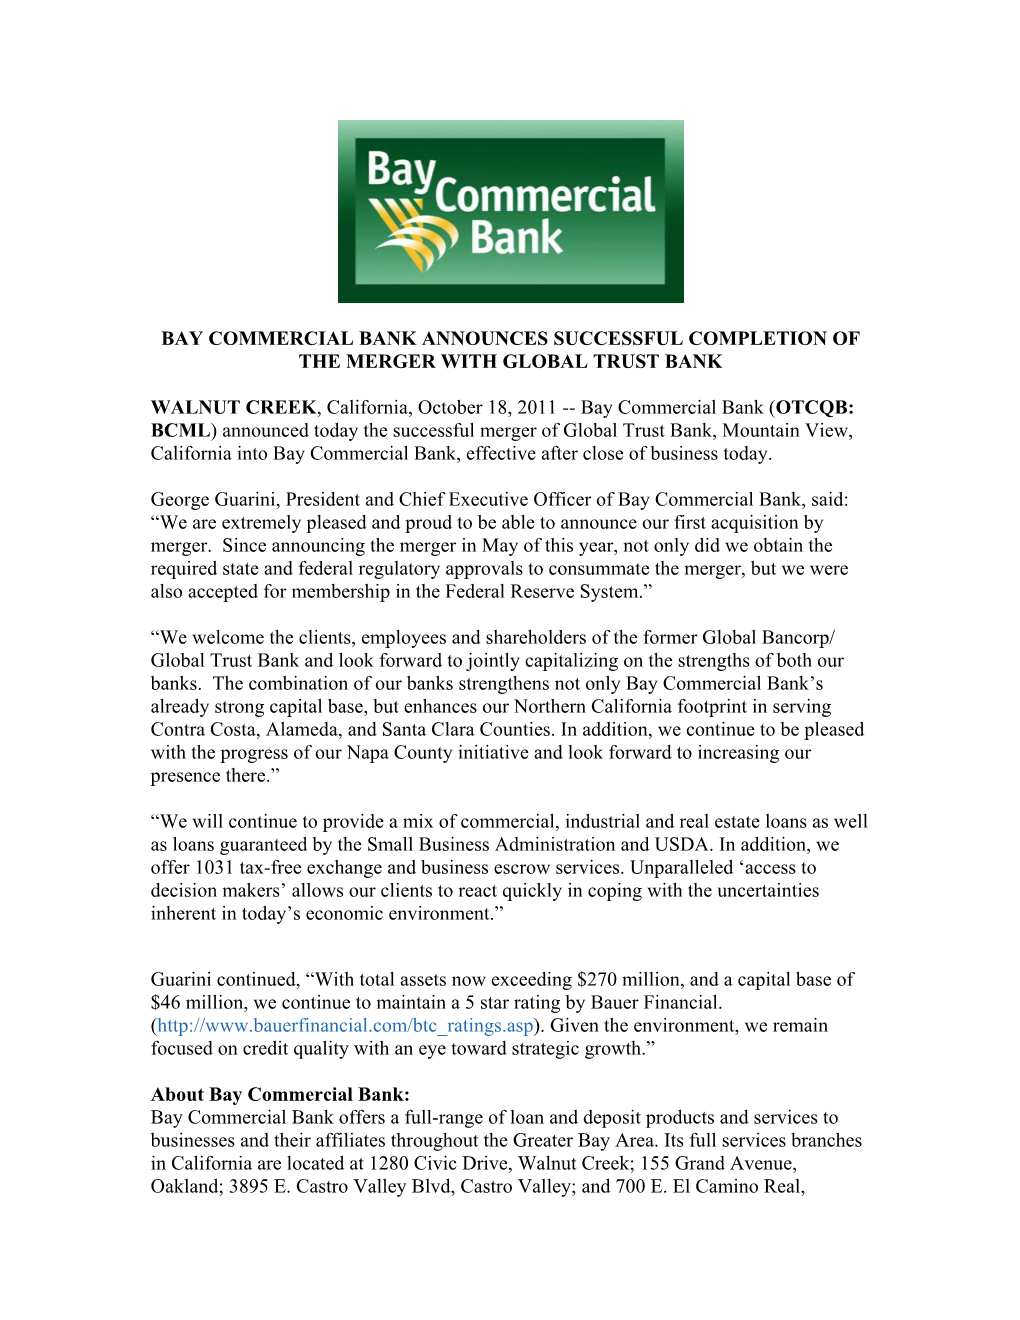 Bay Commercial Bank Announces Successful Completion of the Merger with Global Trust Bank